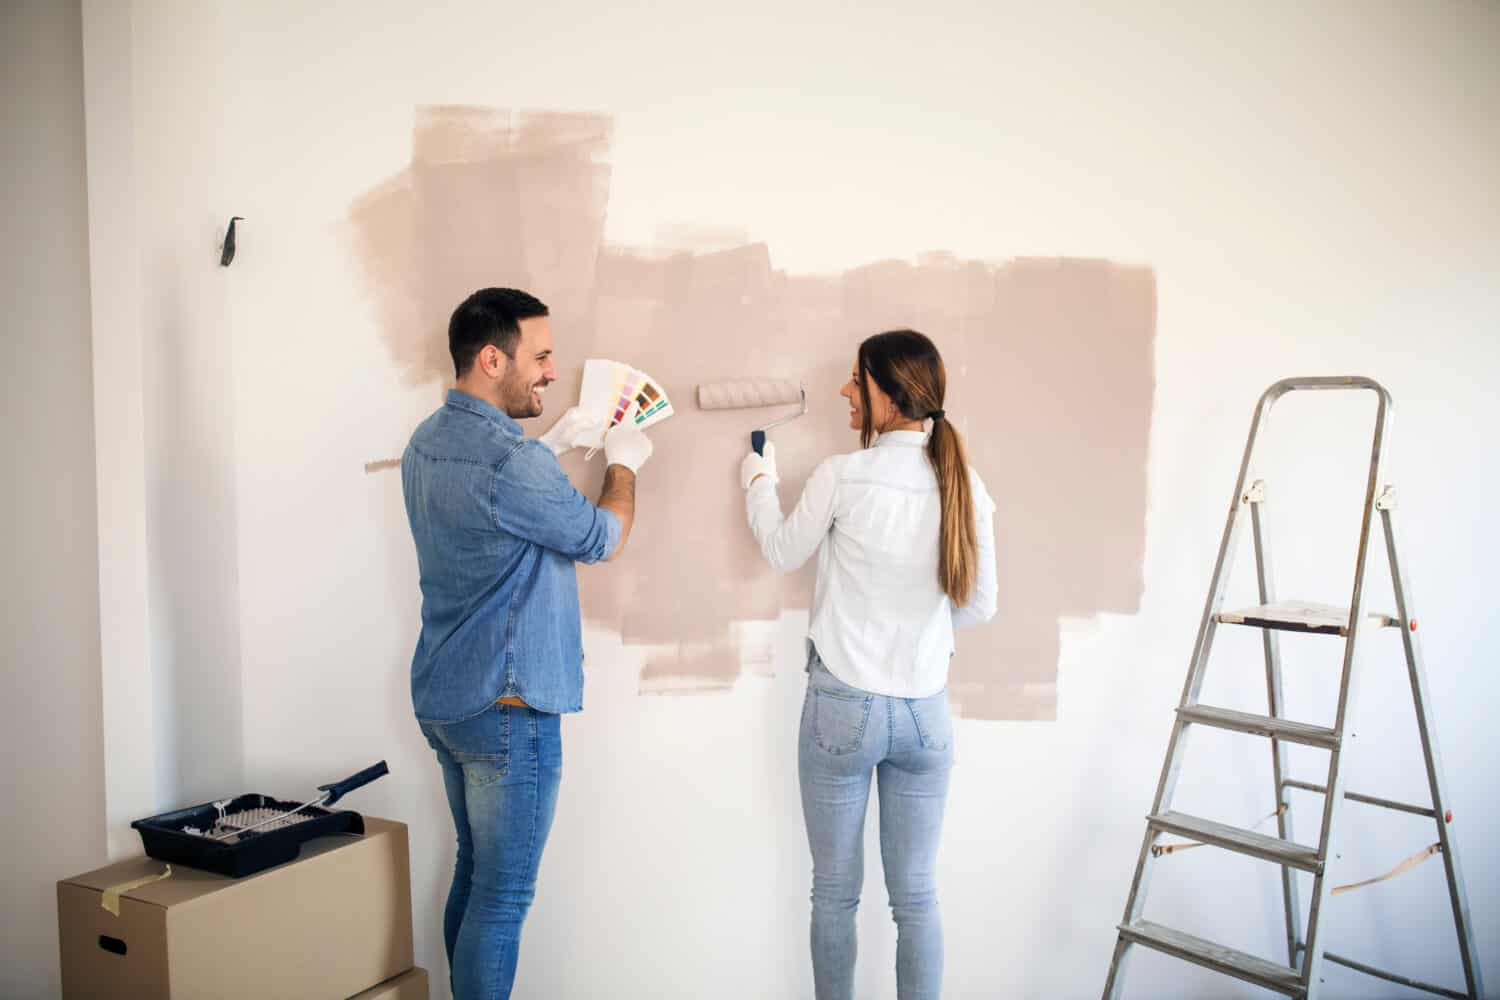 Couple renovating their apartment while man holding color palette and woman painting walls with roller.